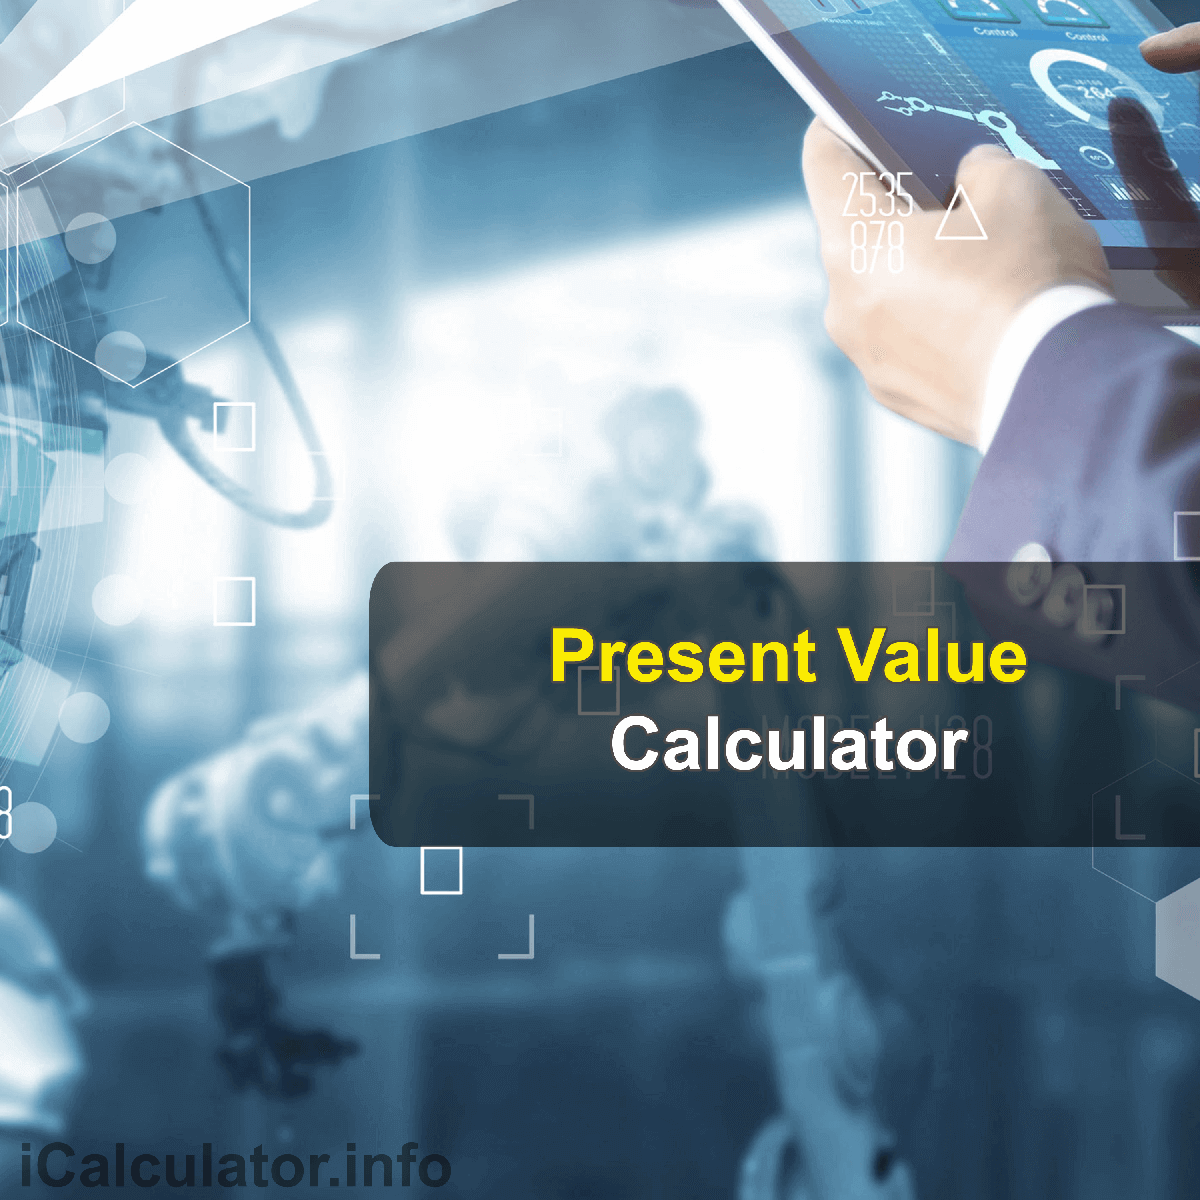 Present Value of a Future SumCalculator. This image provides details of how to calculate the Present Value of a Future Sum using a good calculator, a pen and notepad. By using the Present Value of a Future Sum formula, the Present Value of a Future Sum Calculator provides acalculation of the present value of a future sum on money using known interest rate of an investment and period of the investment.